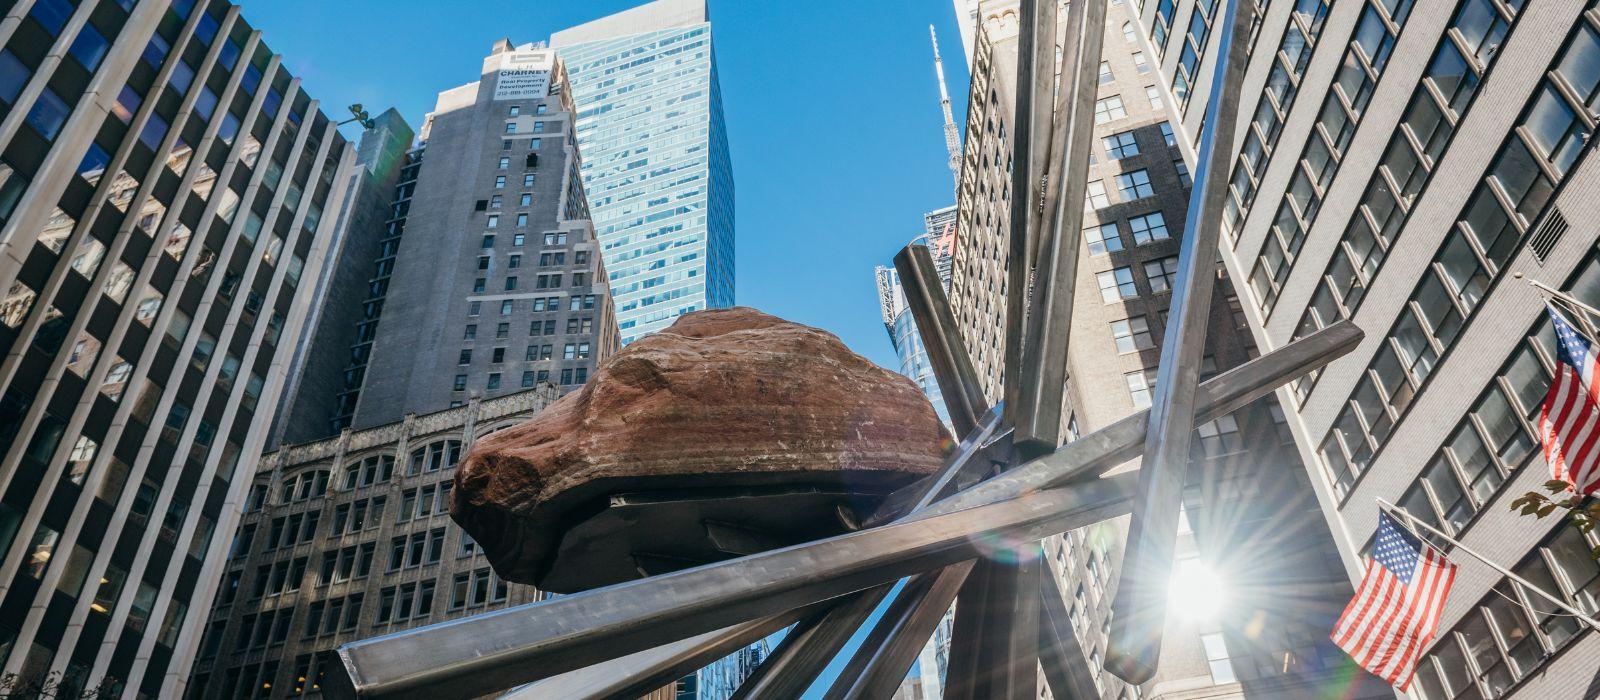 A large boulder supported by diagonal metal poles against the backdrop of skyscrapers. 